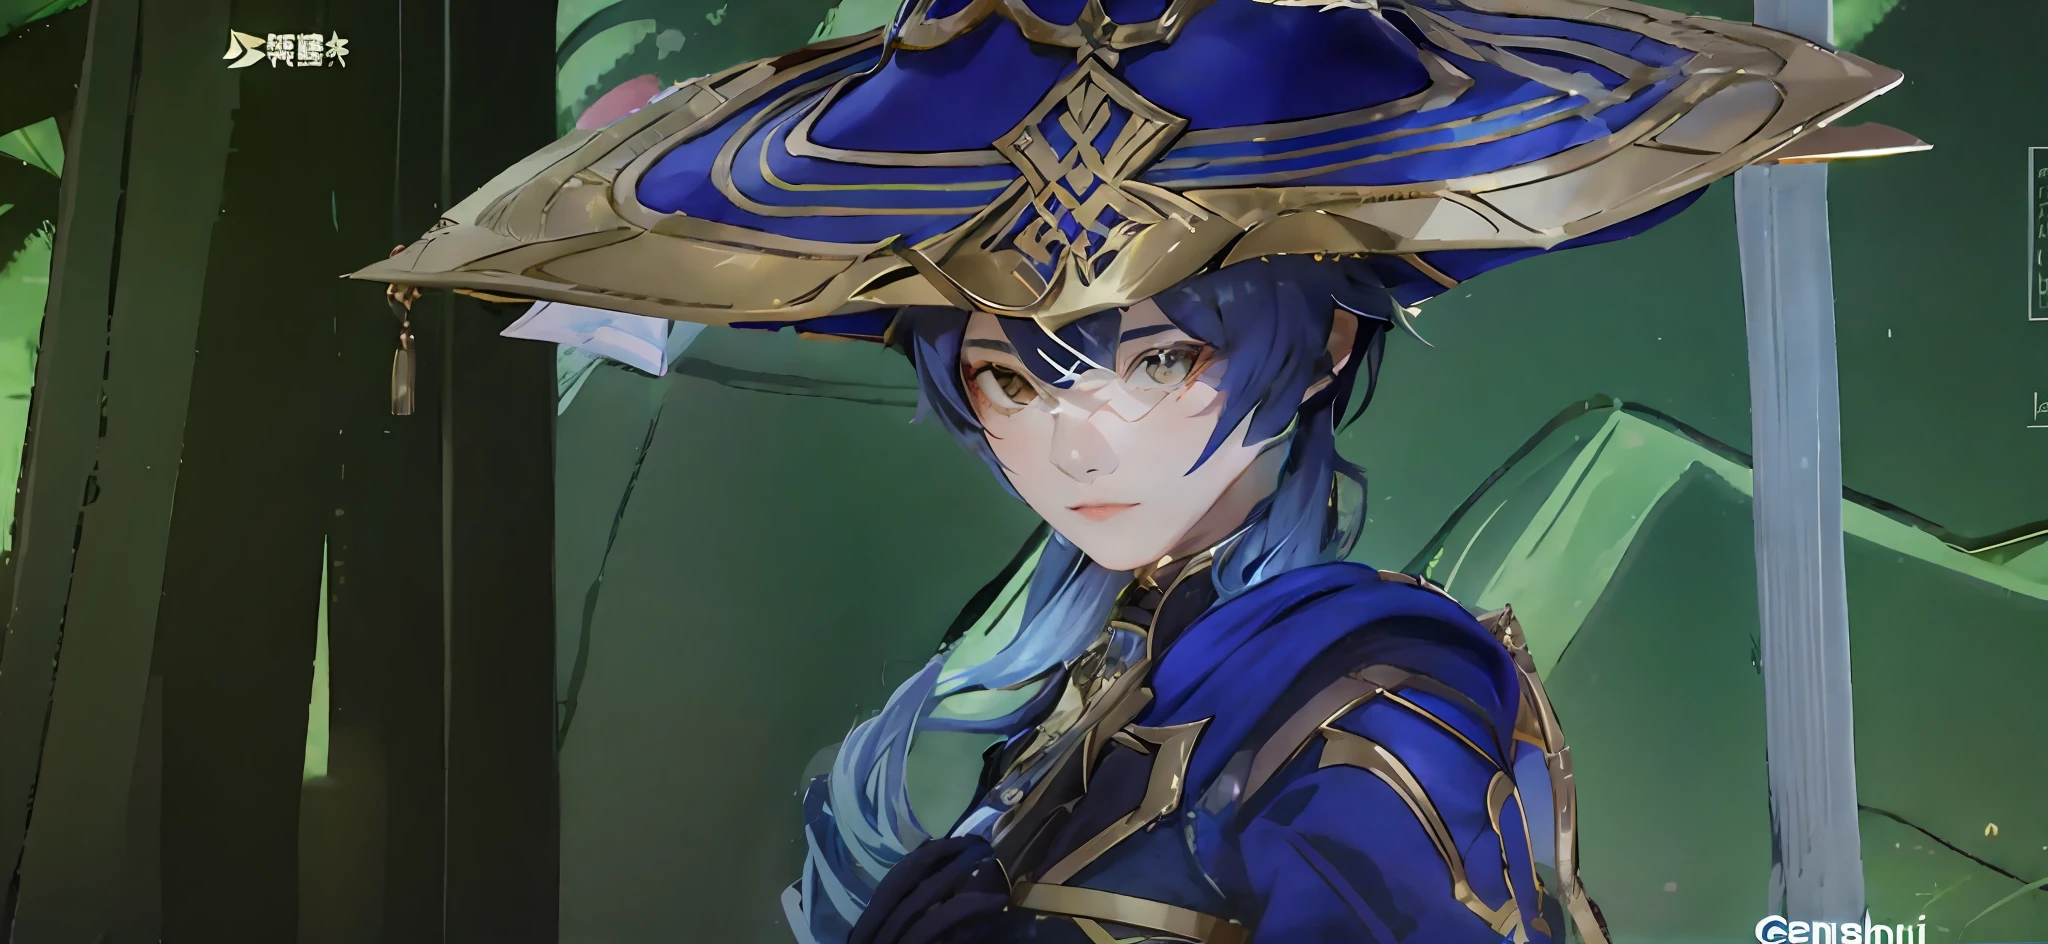 A hat on his head，Anime character with a sword in his hand, shirow masamune, masamune, heise jinyao, Keqing from Genshin Impact, shirow masamune, zhongli from genshin impact, Genshin impact's character, Genshin, Genshin Impact style, Genshin Impact, Avatar image, onmyoji portrait